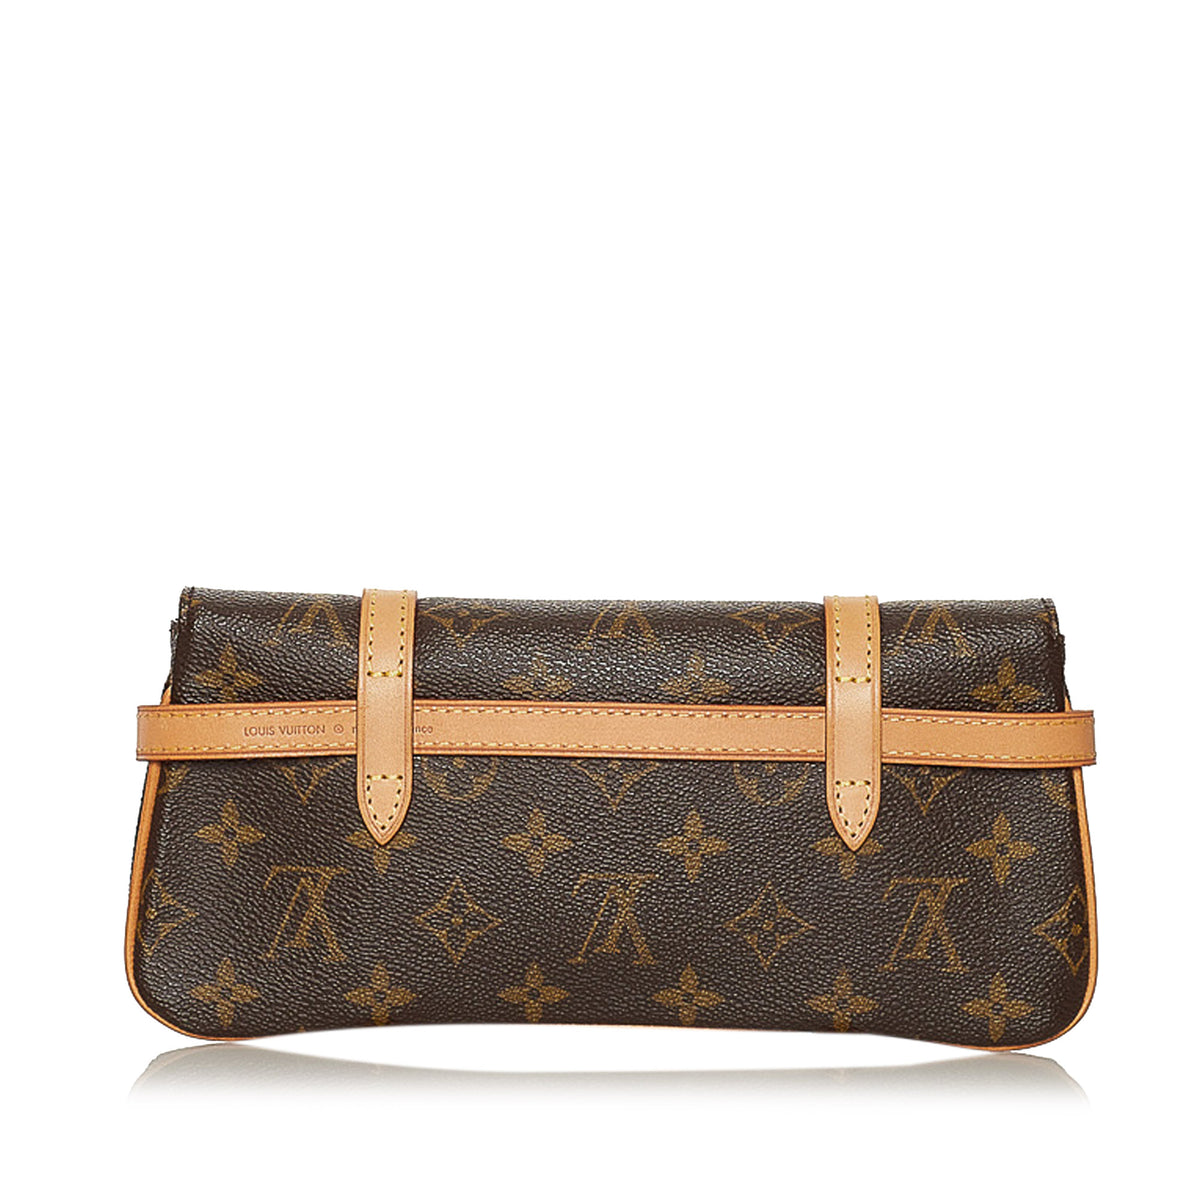 LOUIS VUITTON Perforated Monogram Belt in Scotch - More Than You Can Imagine